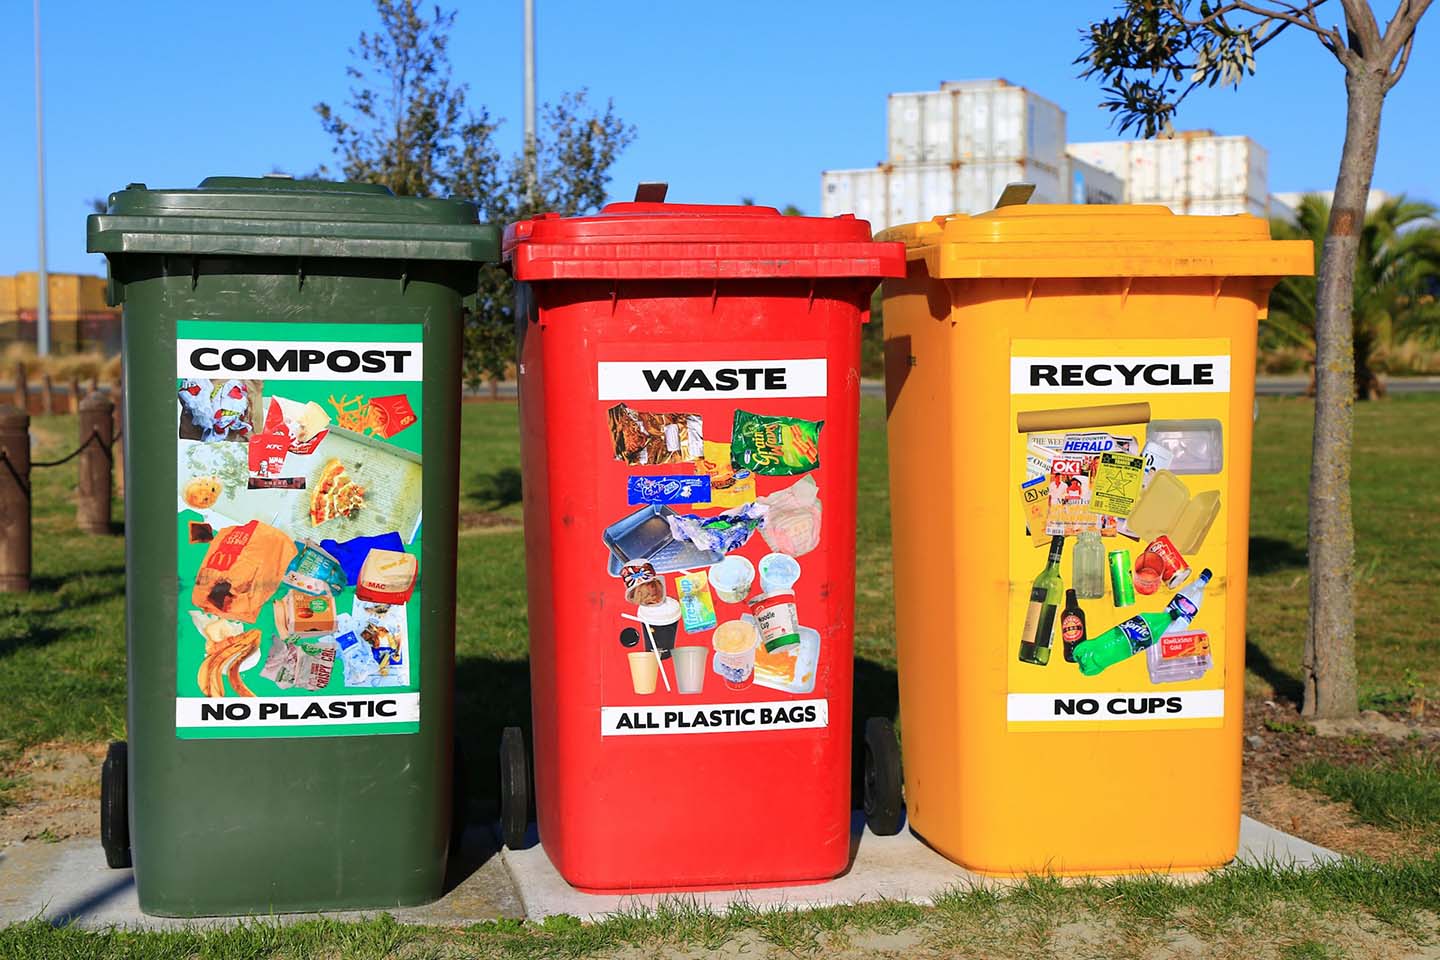 green, red, and yellow trash bins labeled with compost, waste, and recycle respectively